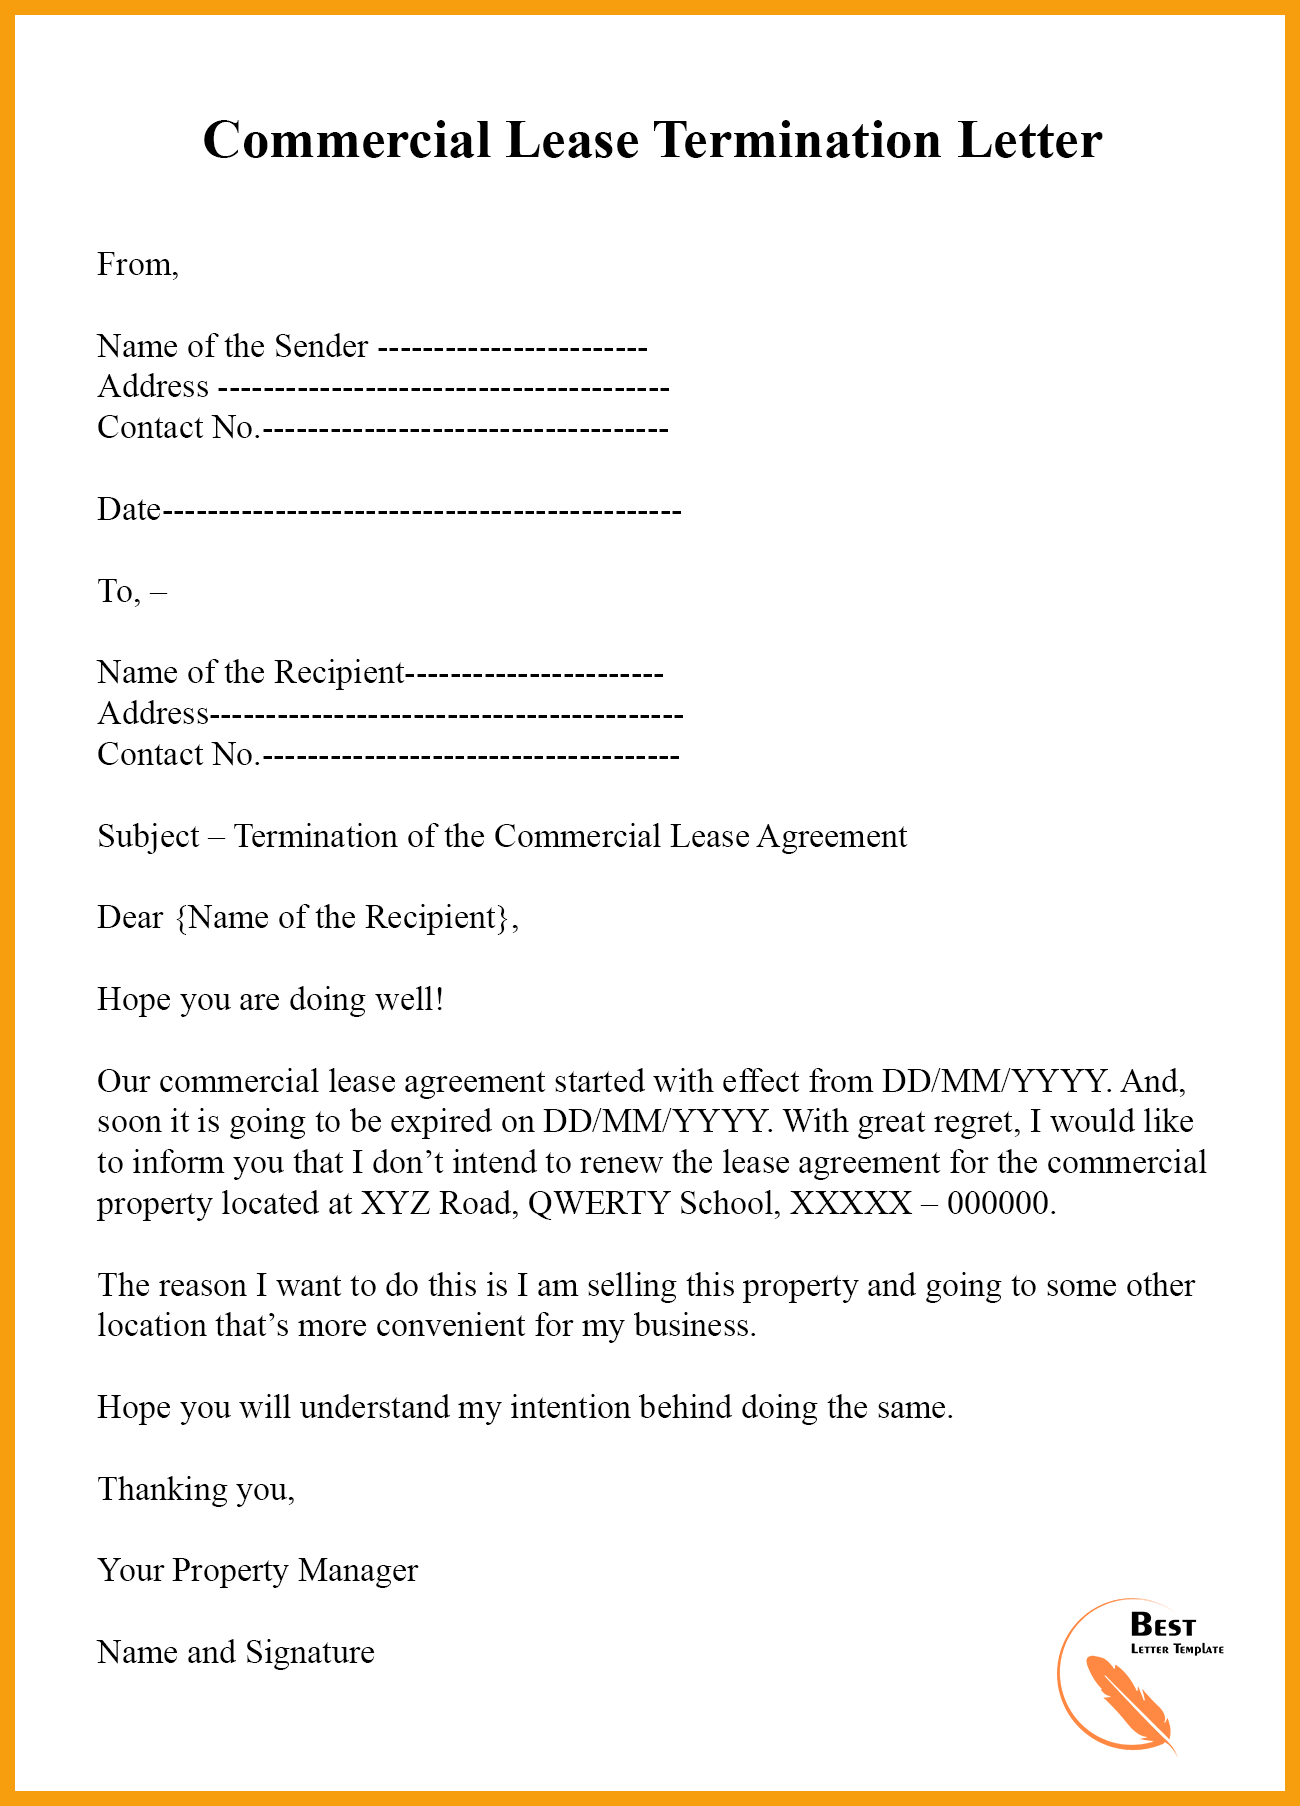 Commercial Lease Termination Letter from bestlettertemplate.com